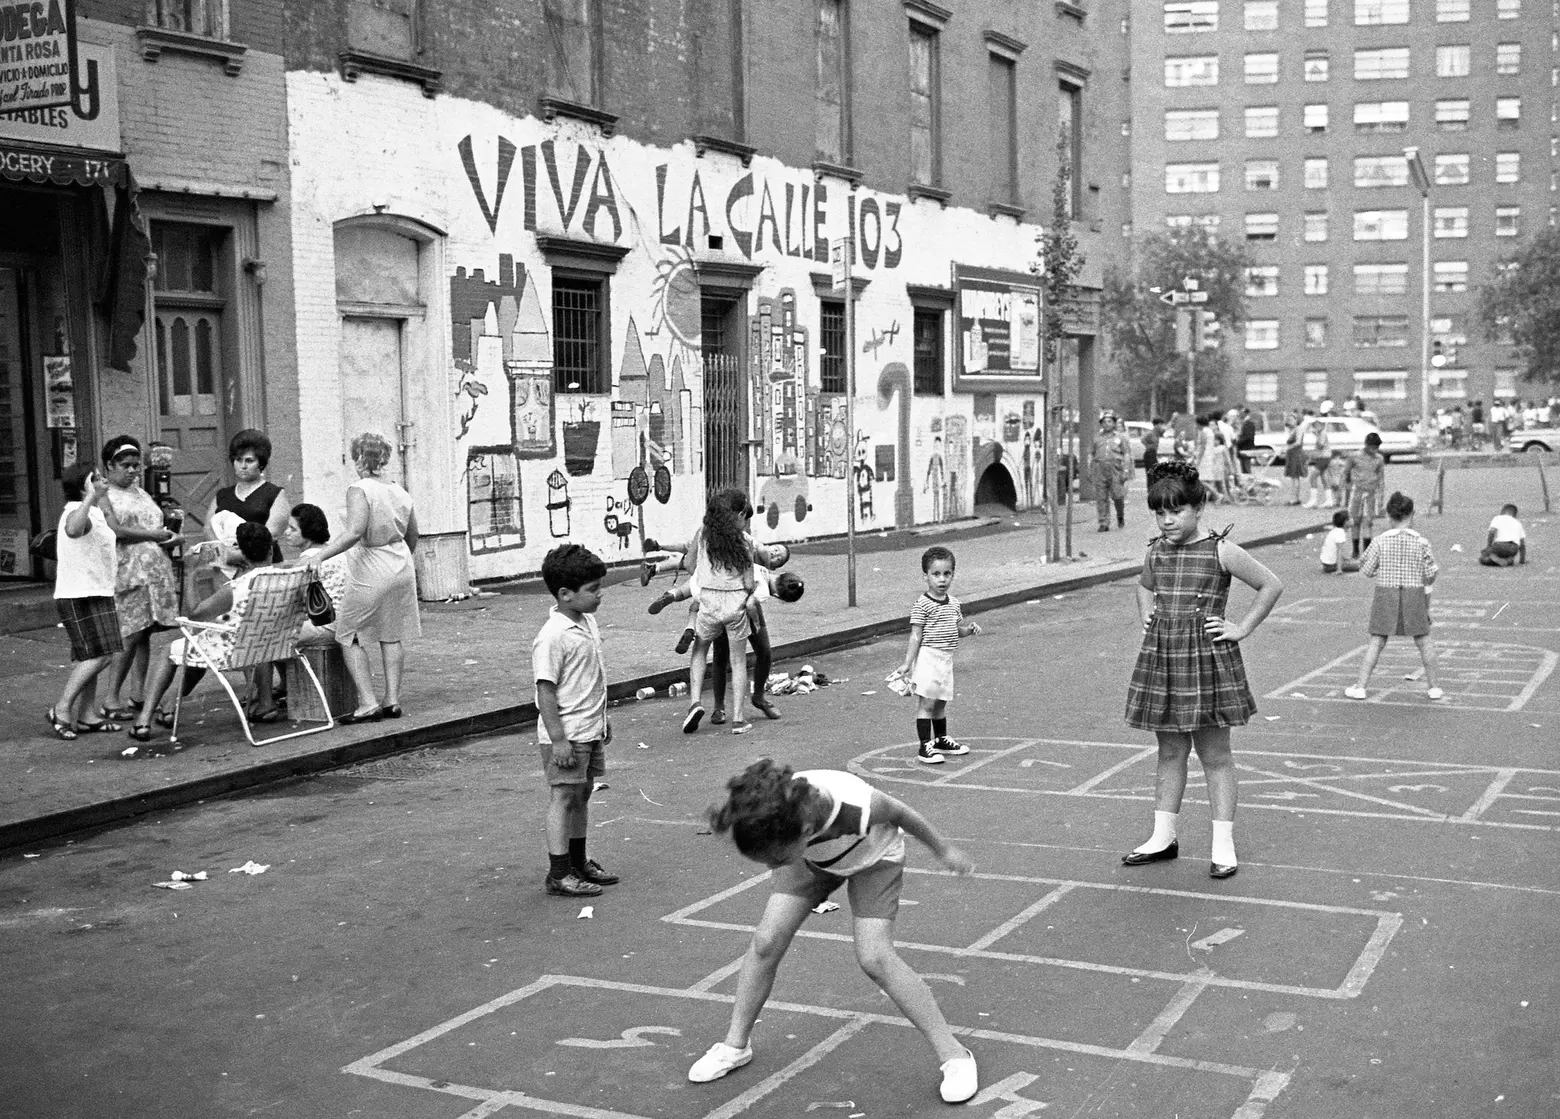 New photo exhibit shows New York City children playing on car-free streets in the summer of ’68